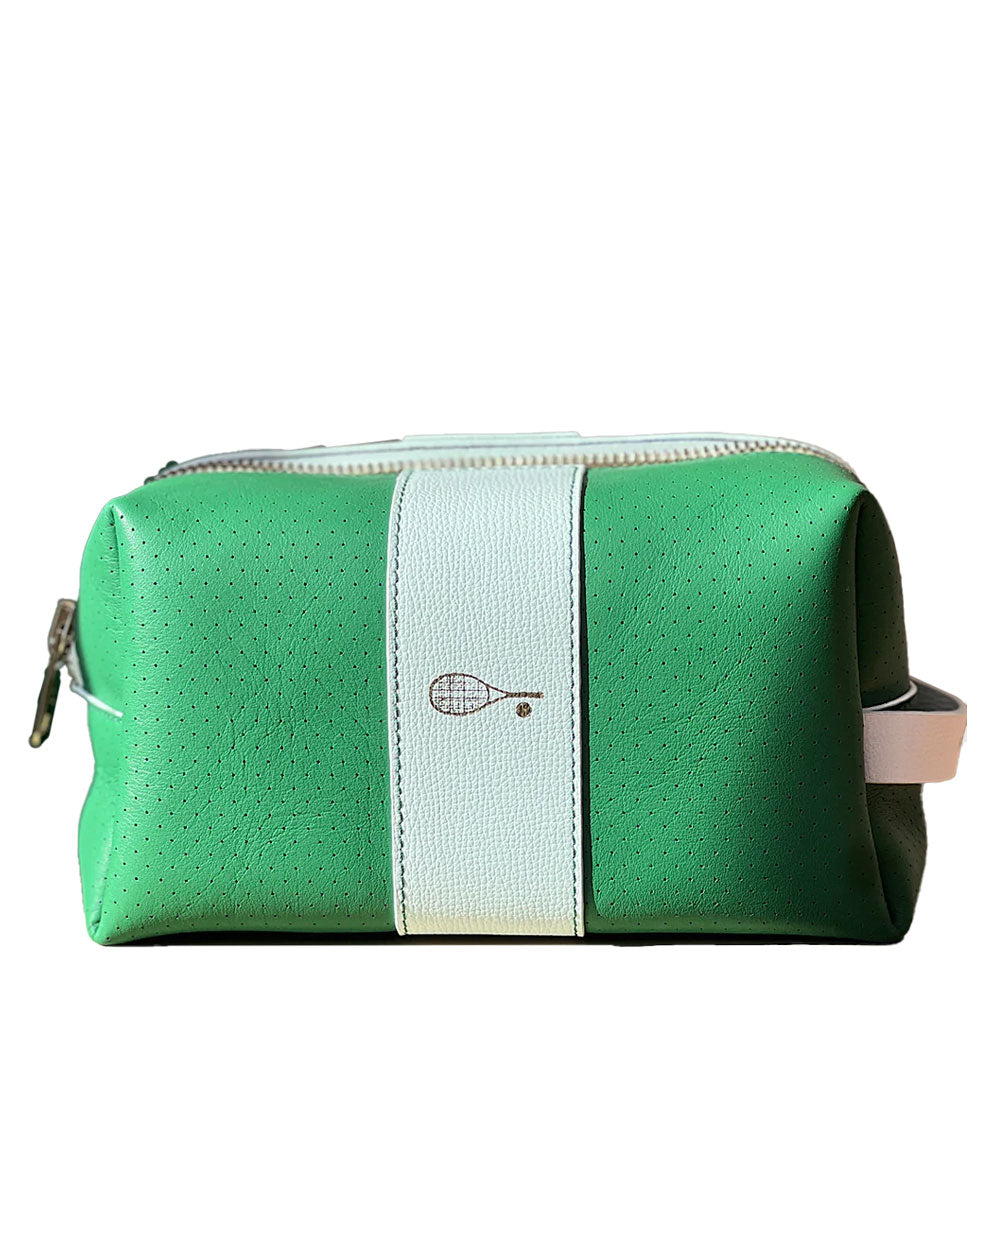 24/7 Bag in Green and White